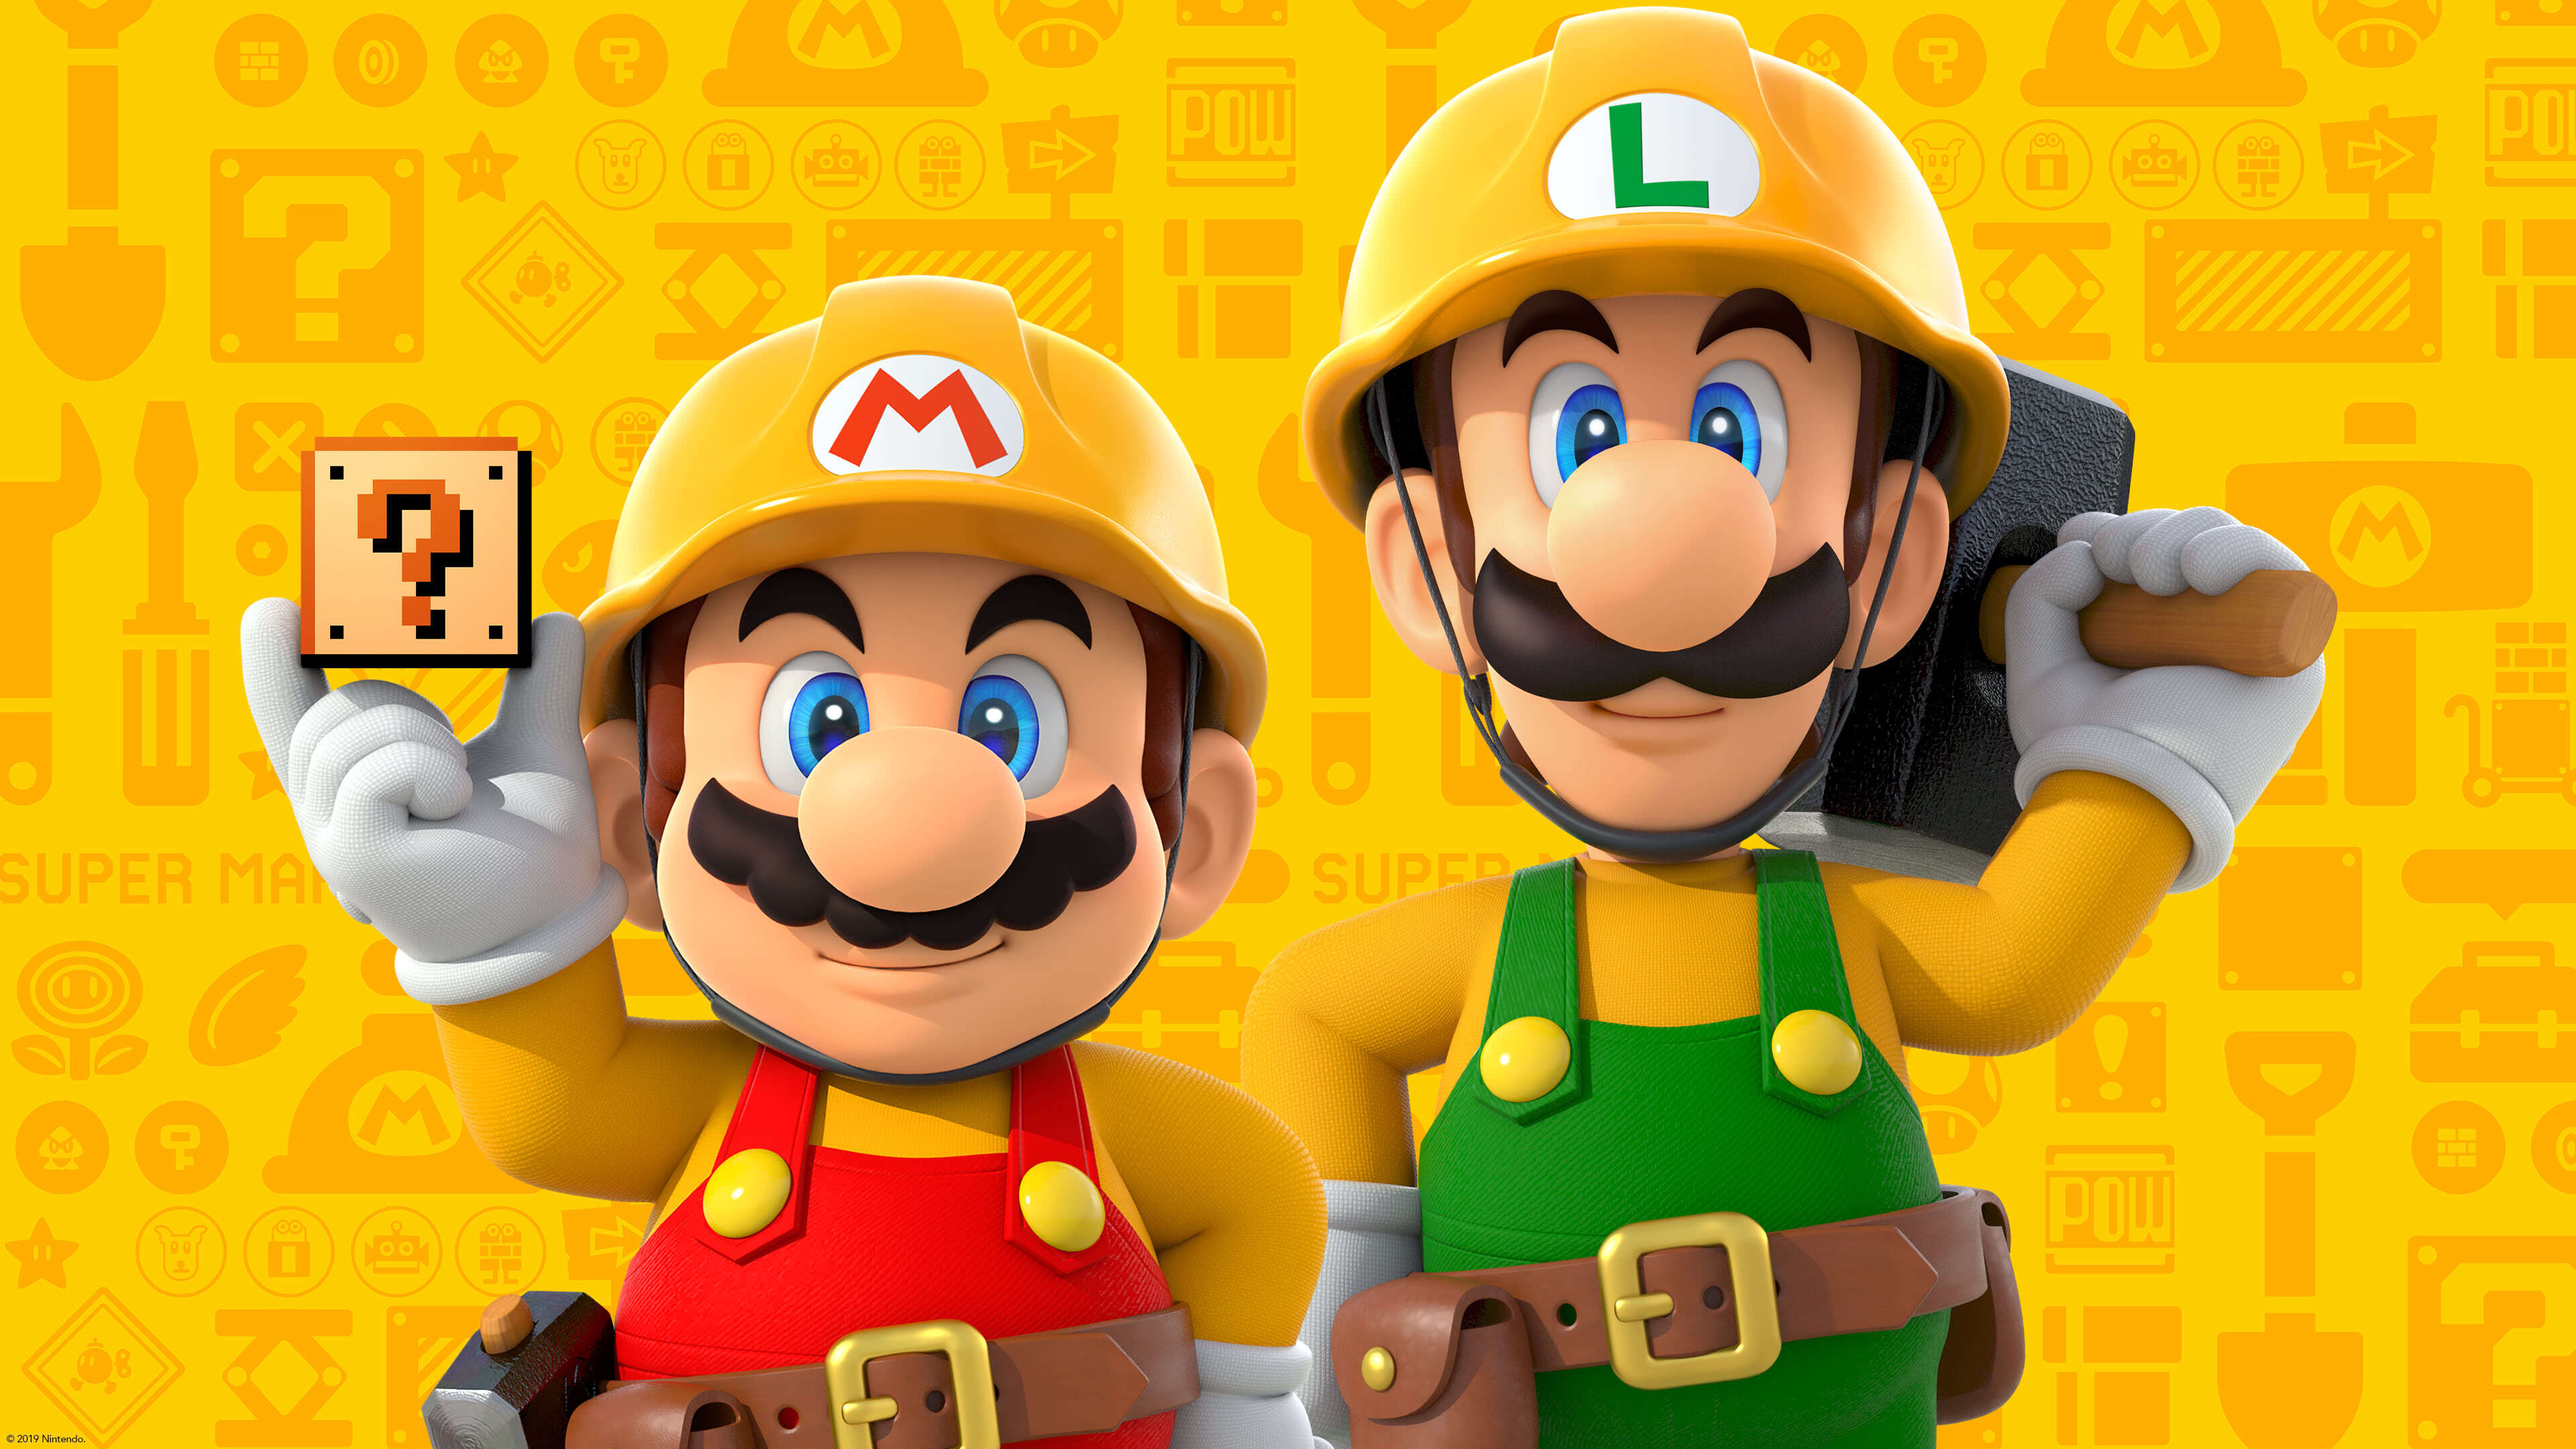 how to download super mario maker 2 on pc for free